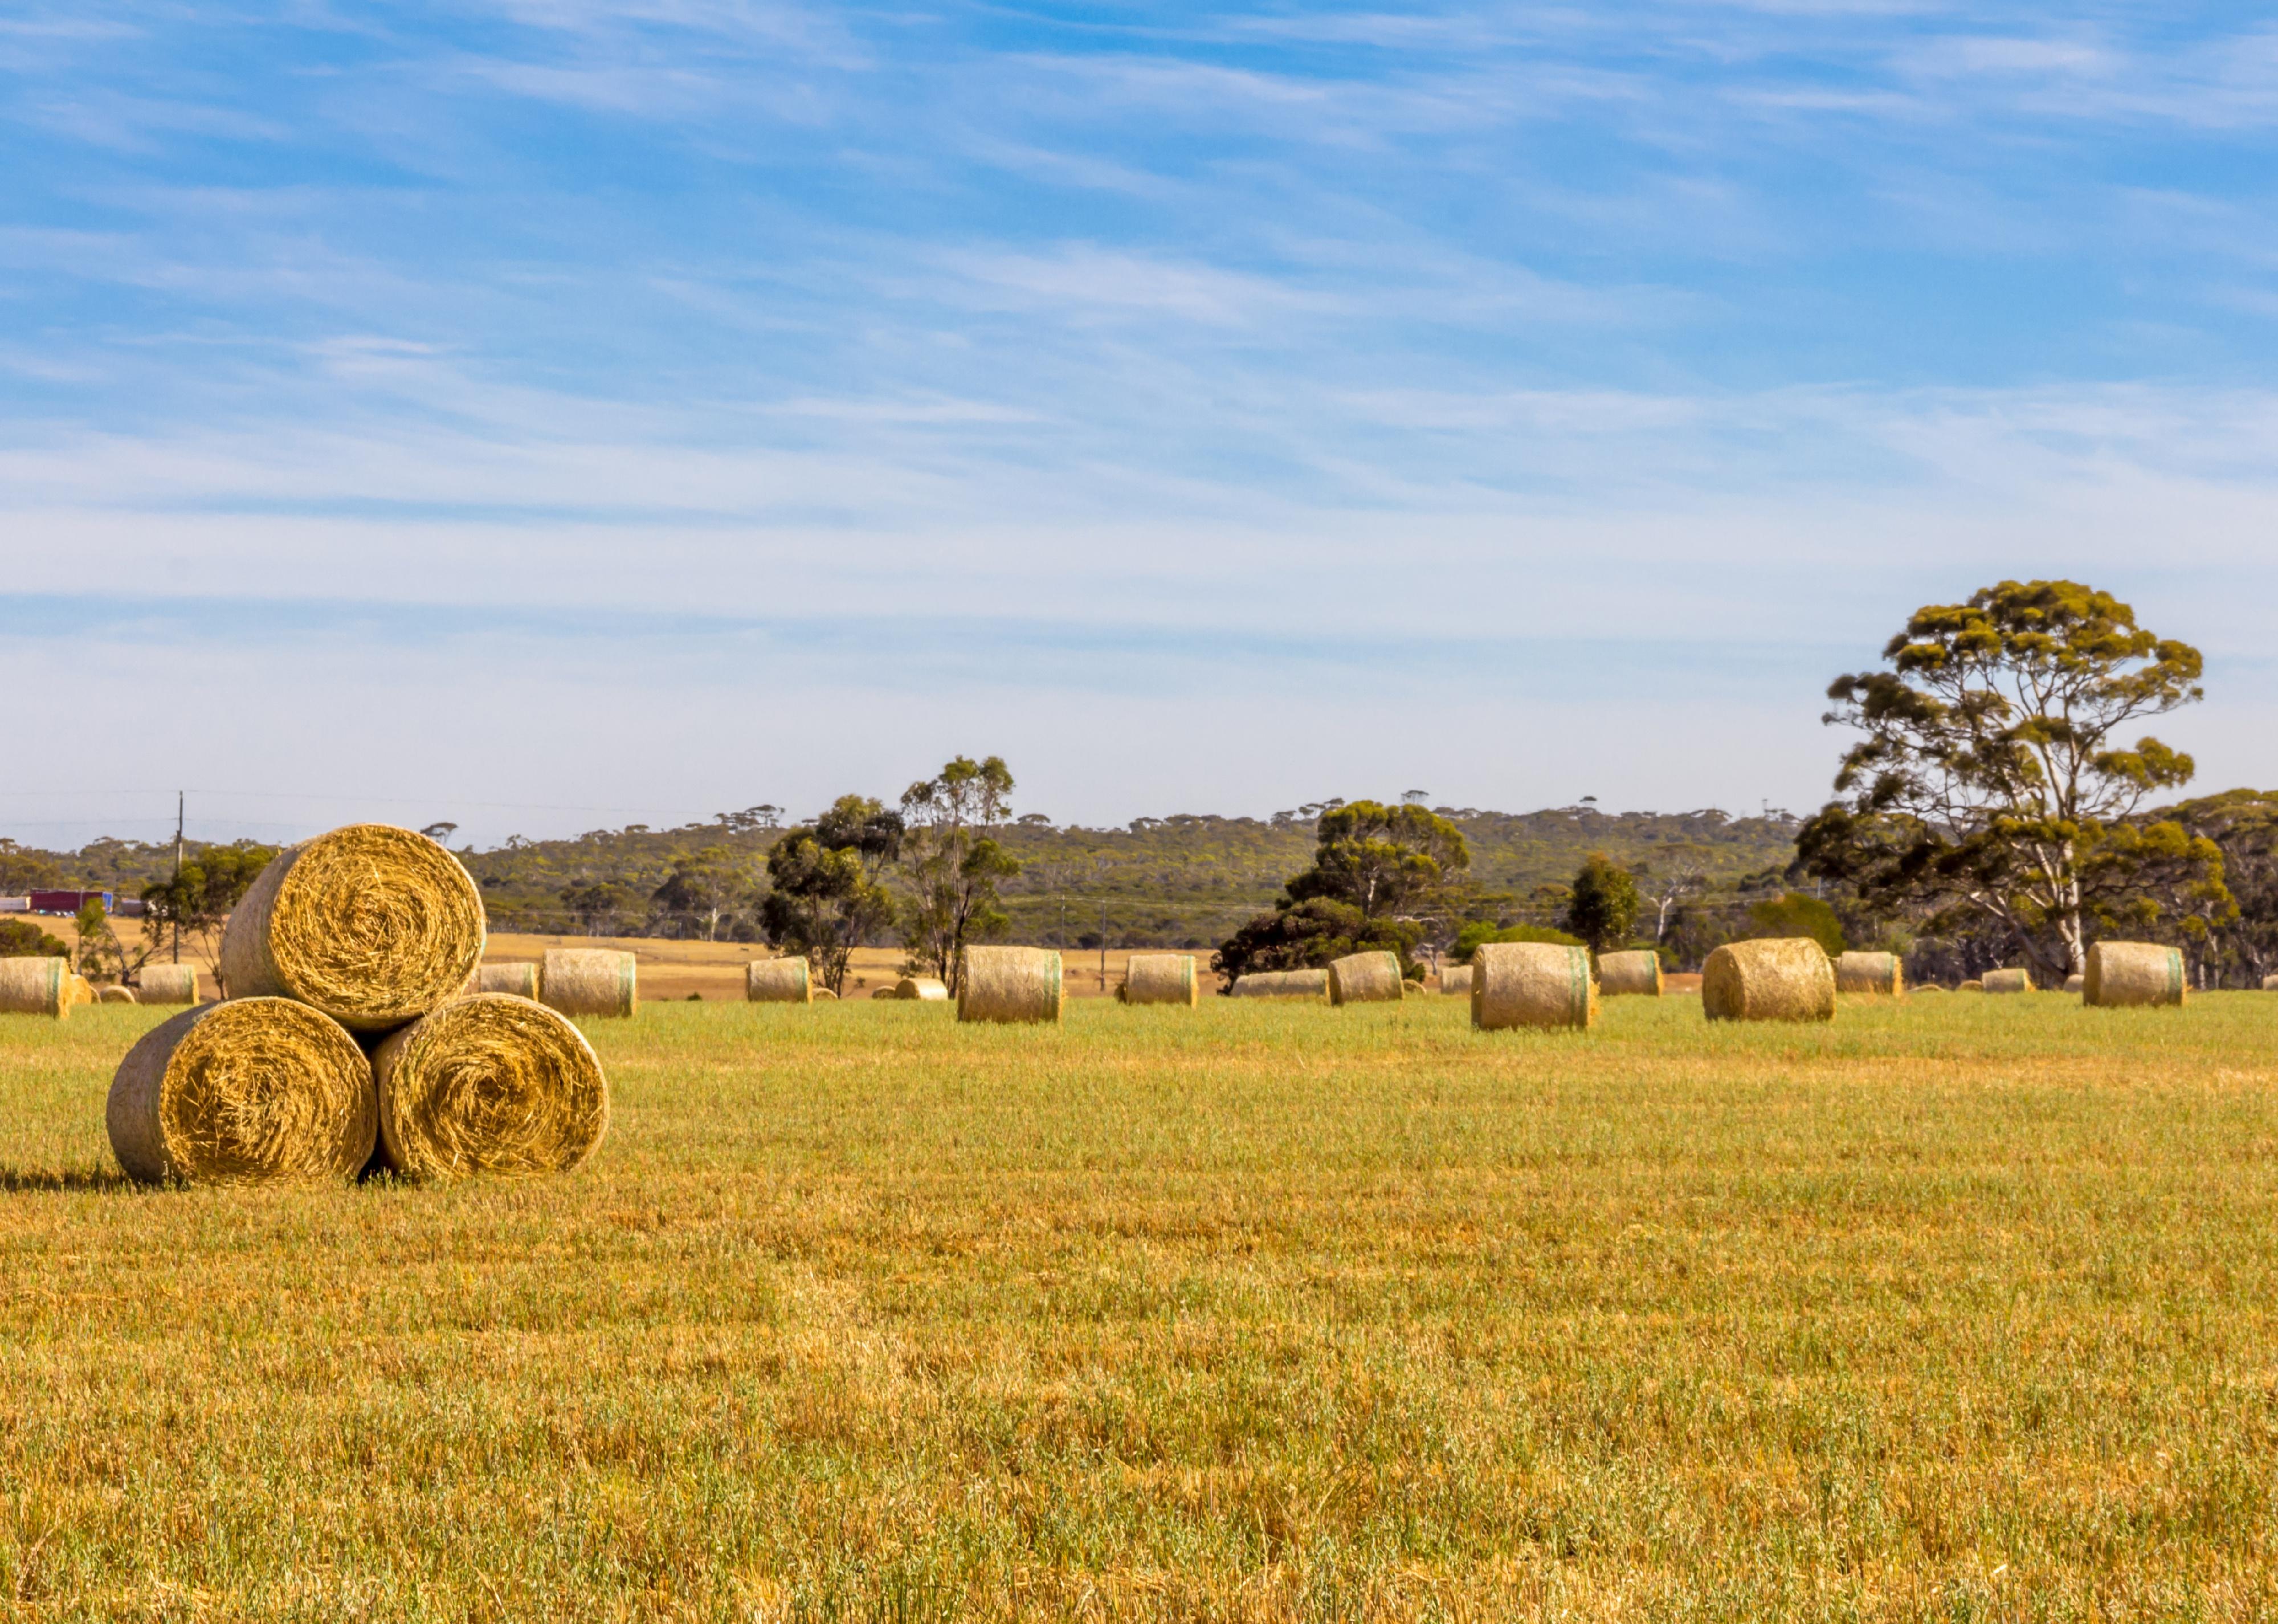 Round straw bales in harvested fields on a sunny day.